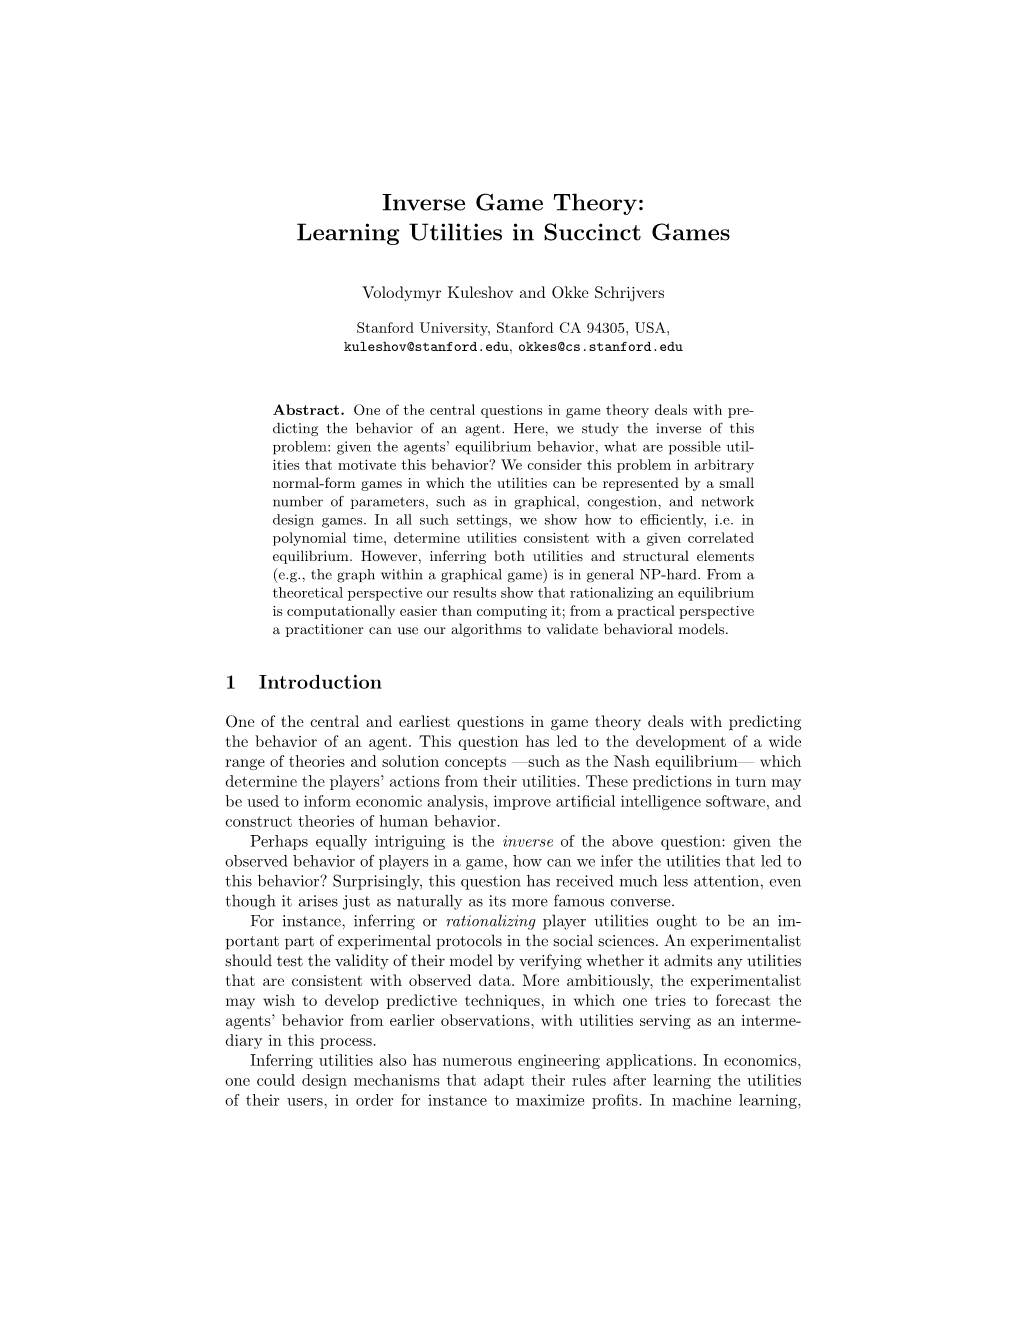 Inverse Game Theory: Learning Utilities in Succinct Games